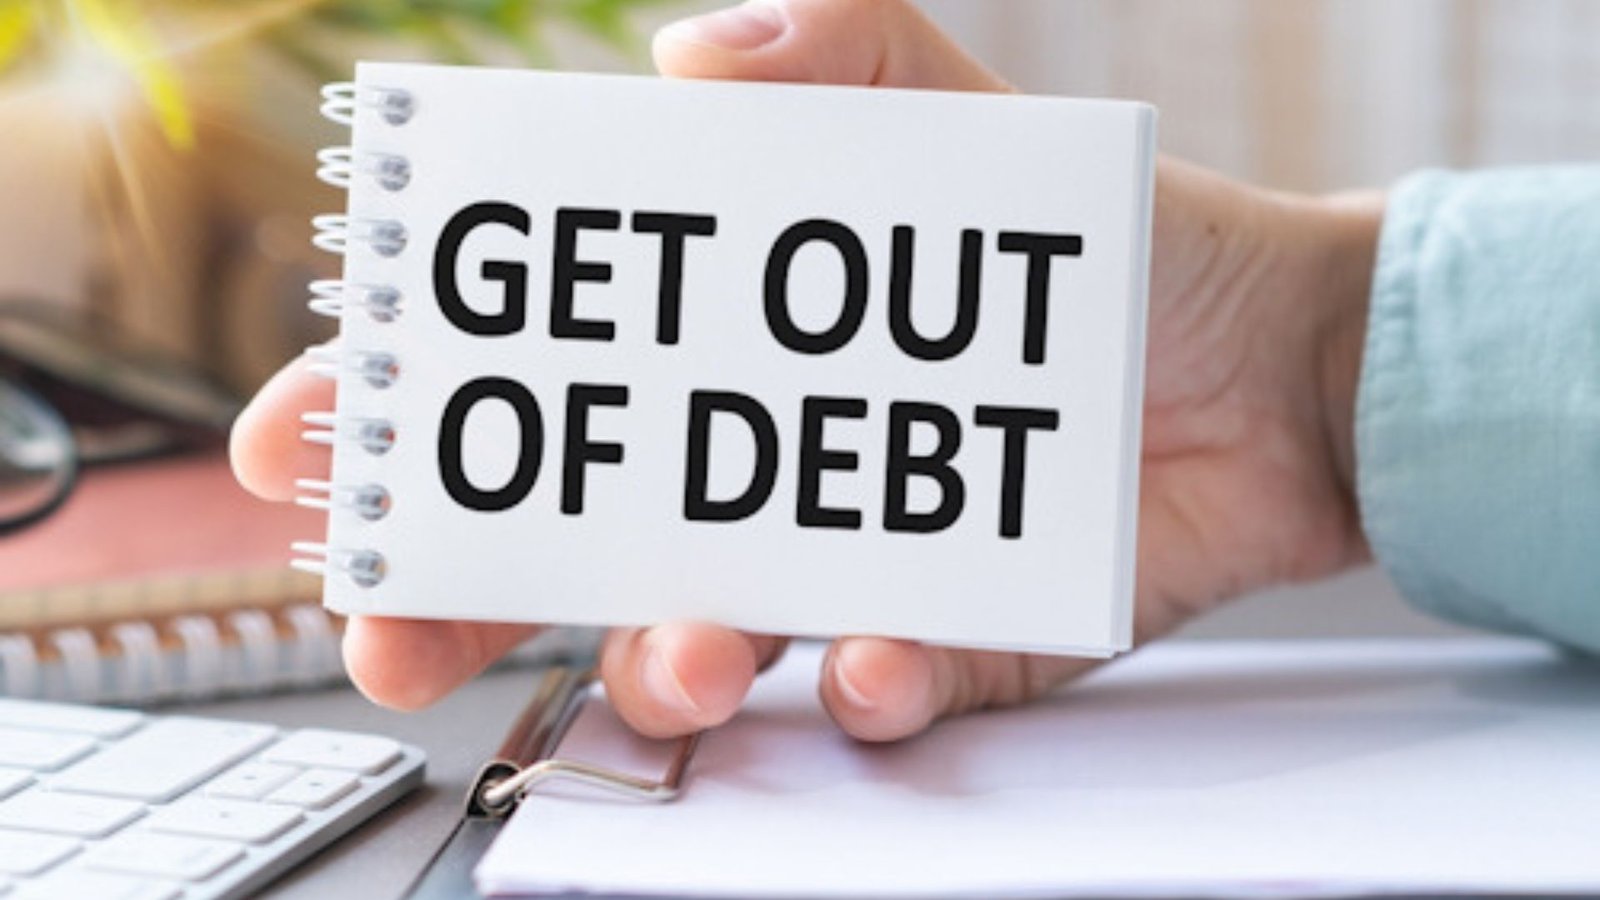 A Hand Holding a Get Out of Debt Card 